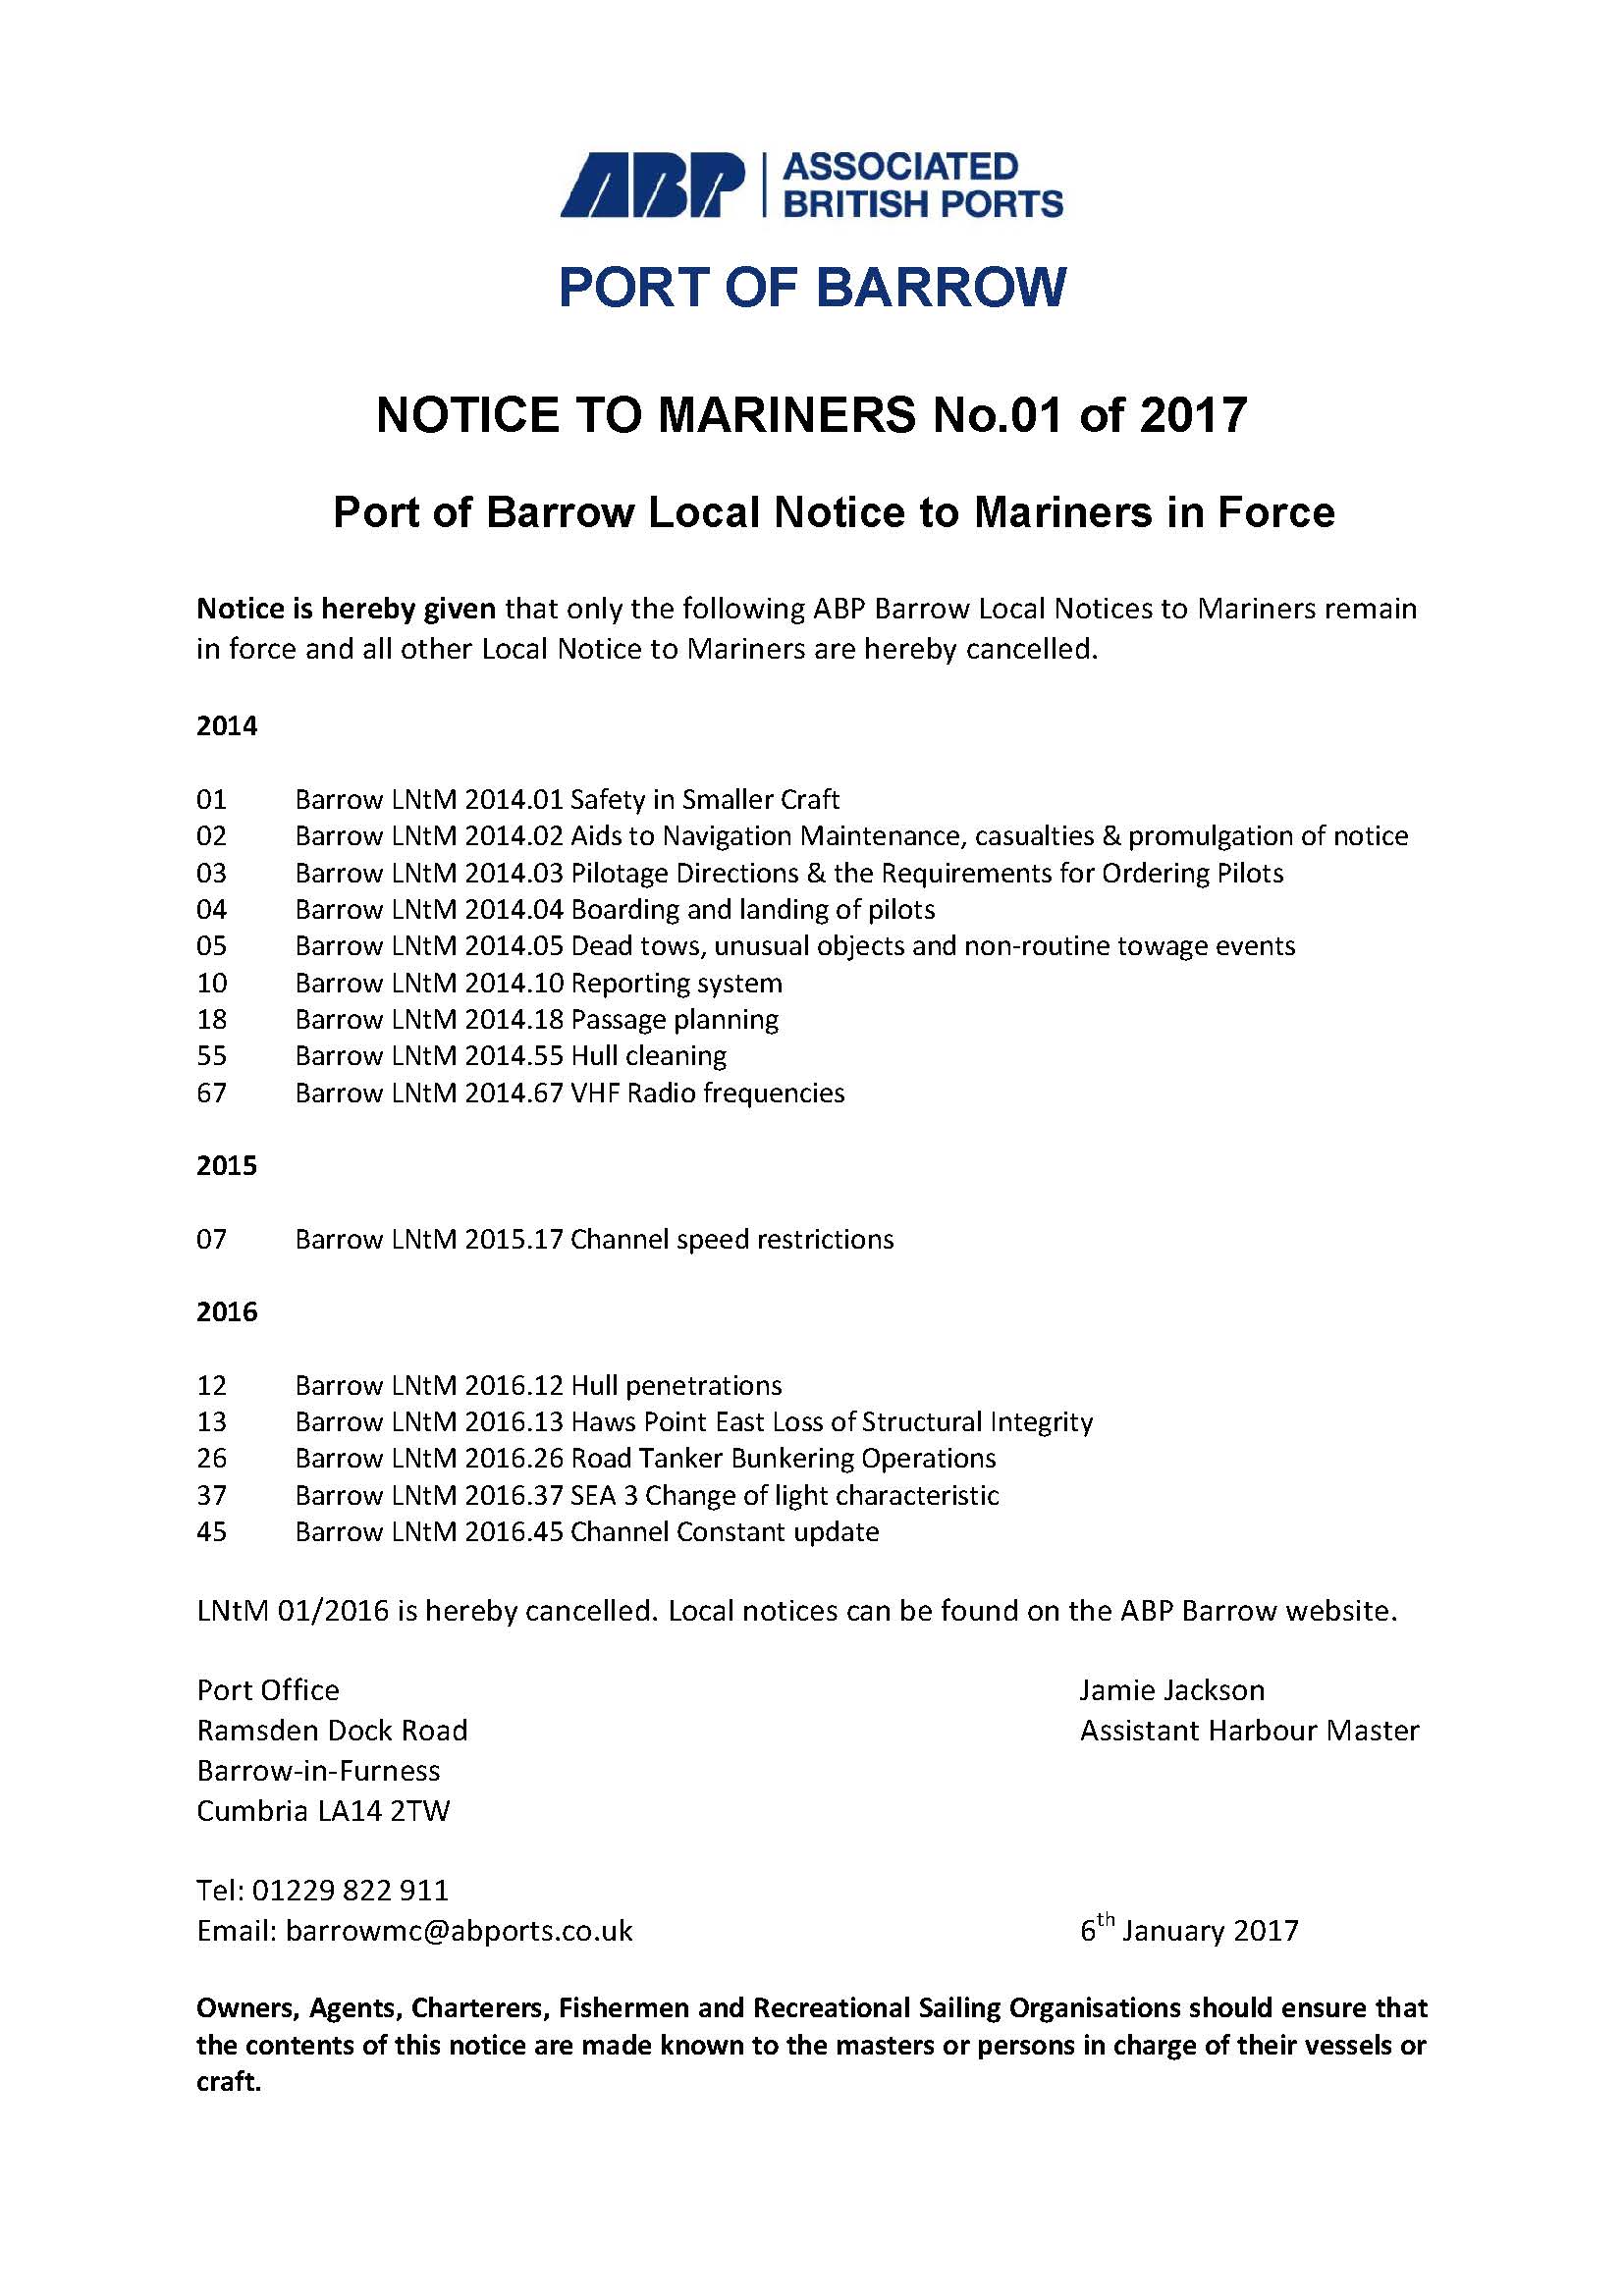 Notice to Mariners 1